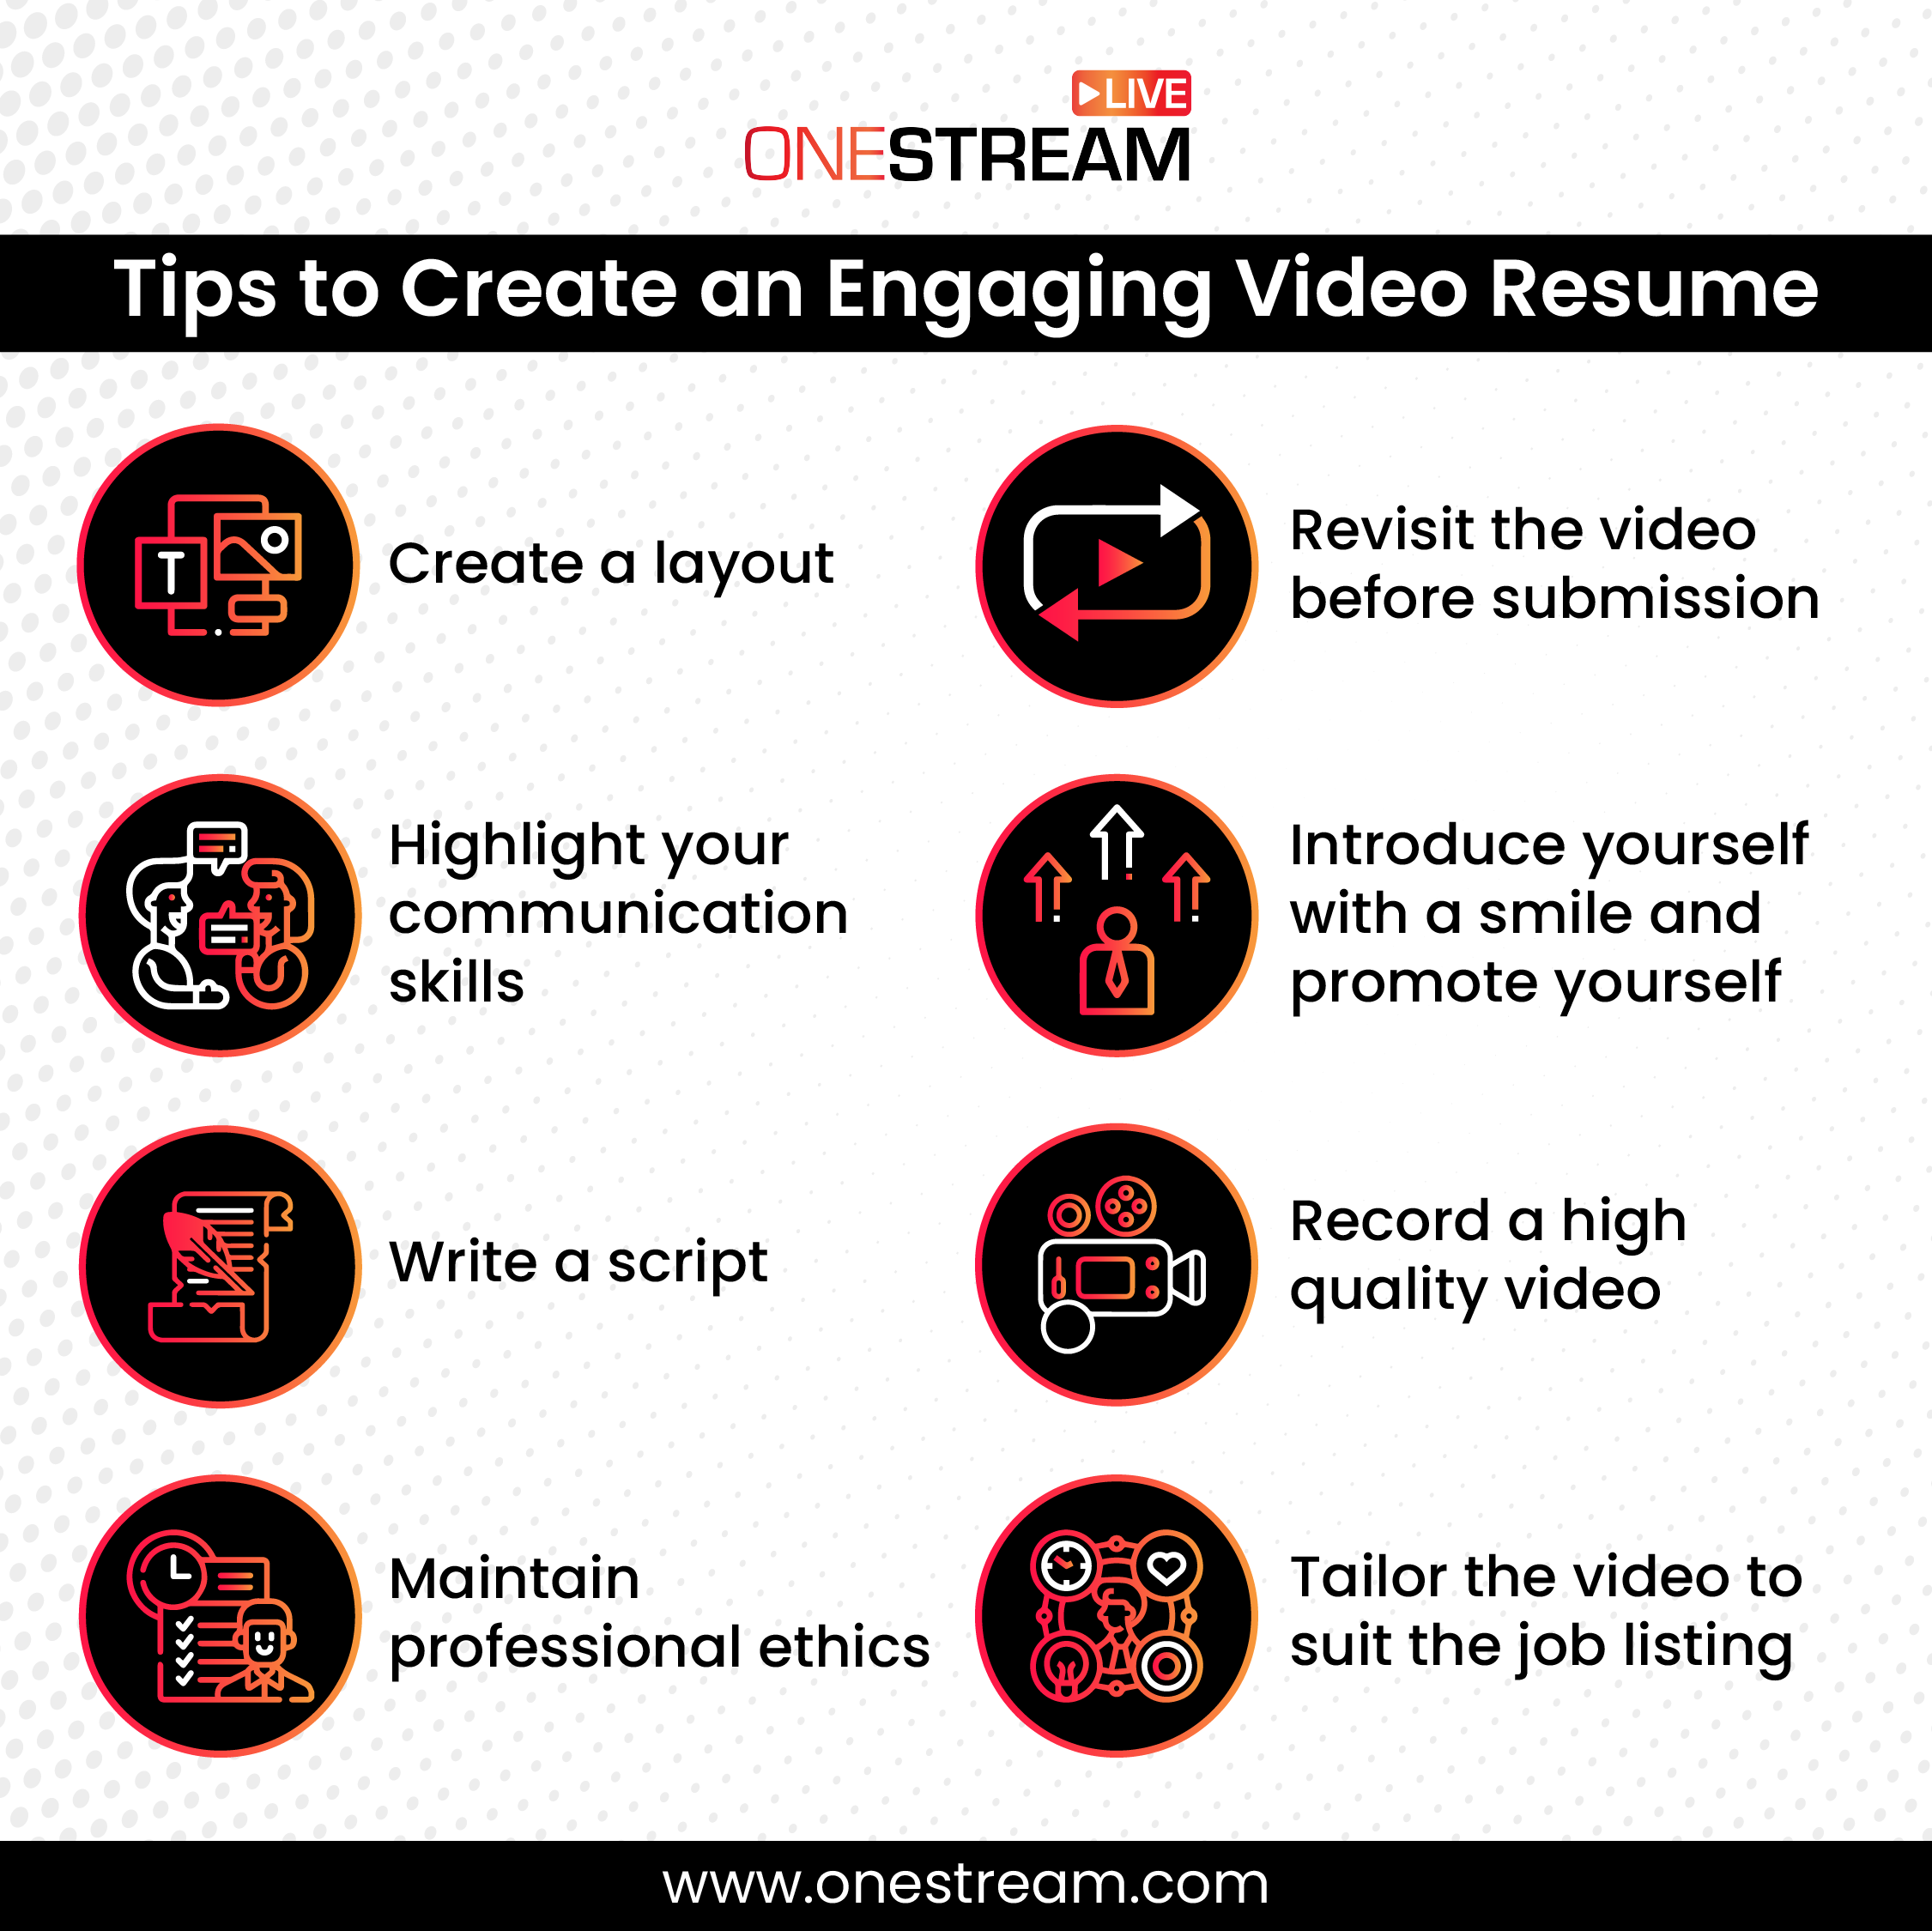 Tips to create a video resume